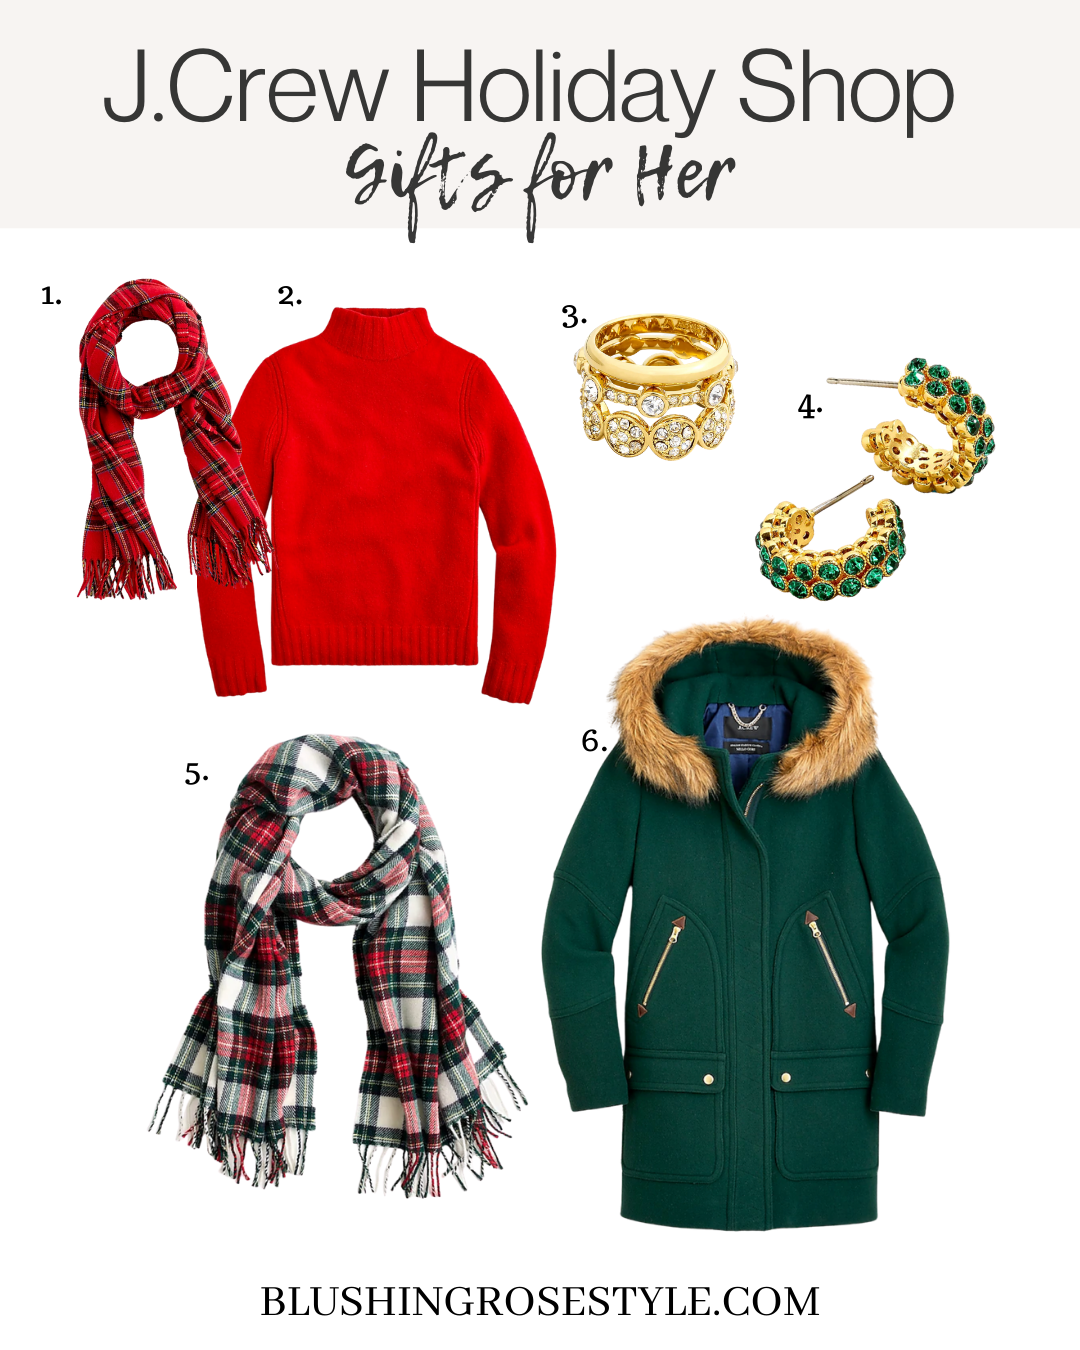 Jcrew Gifts for Her